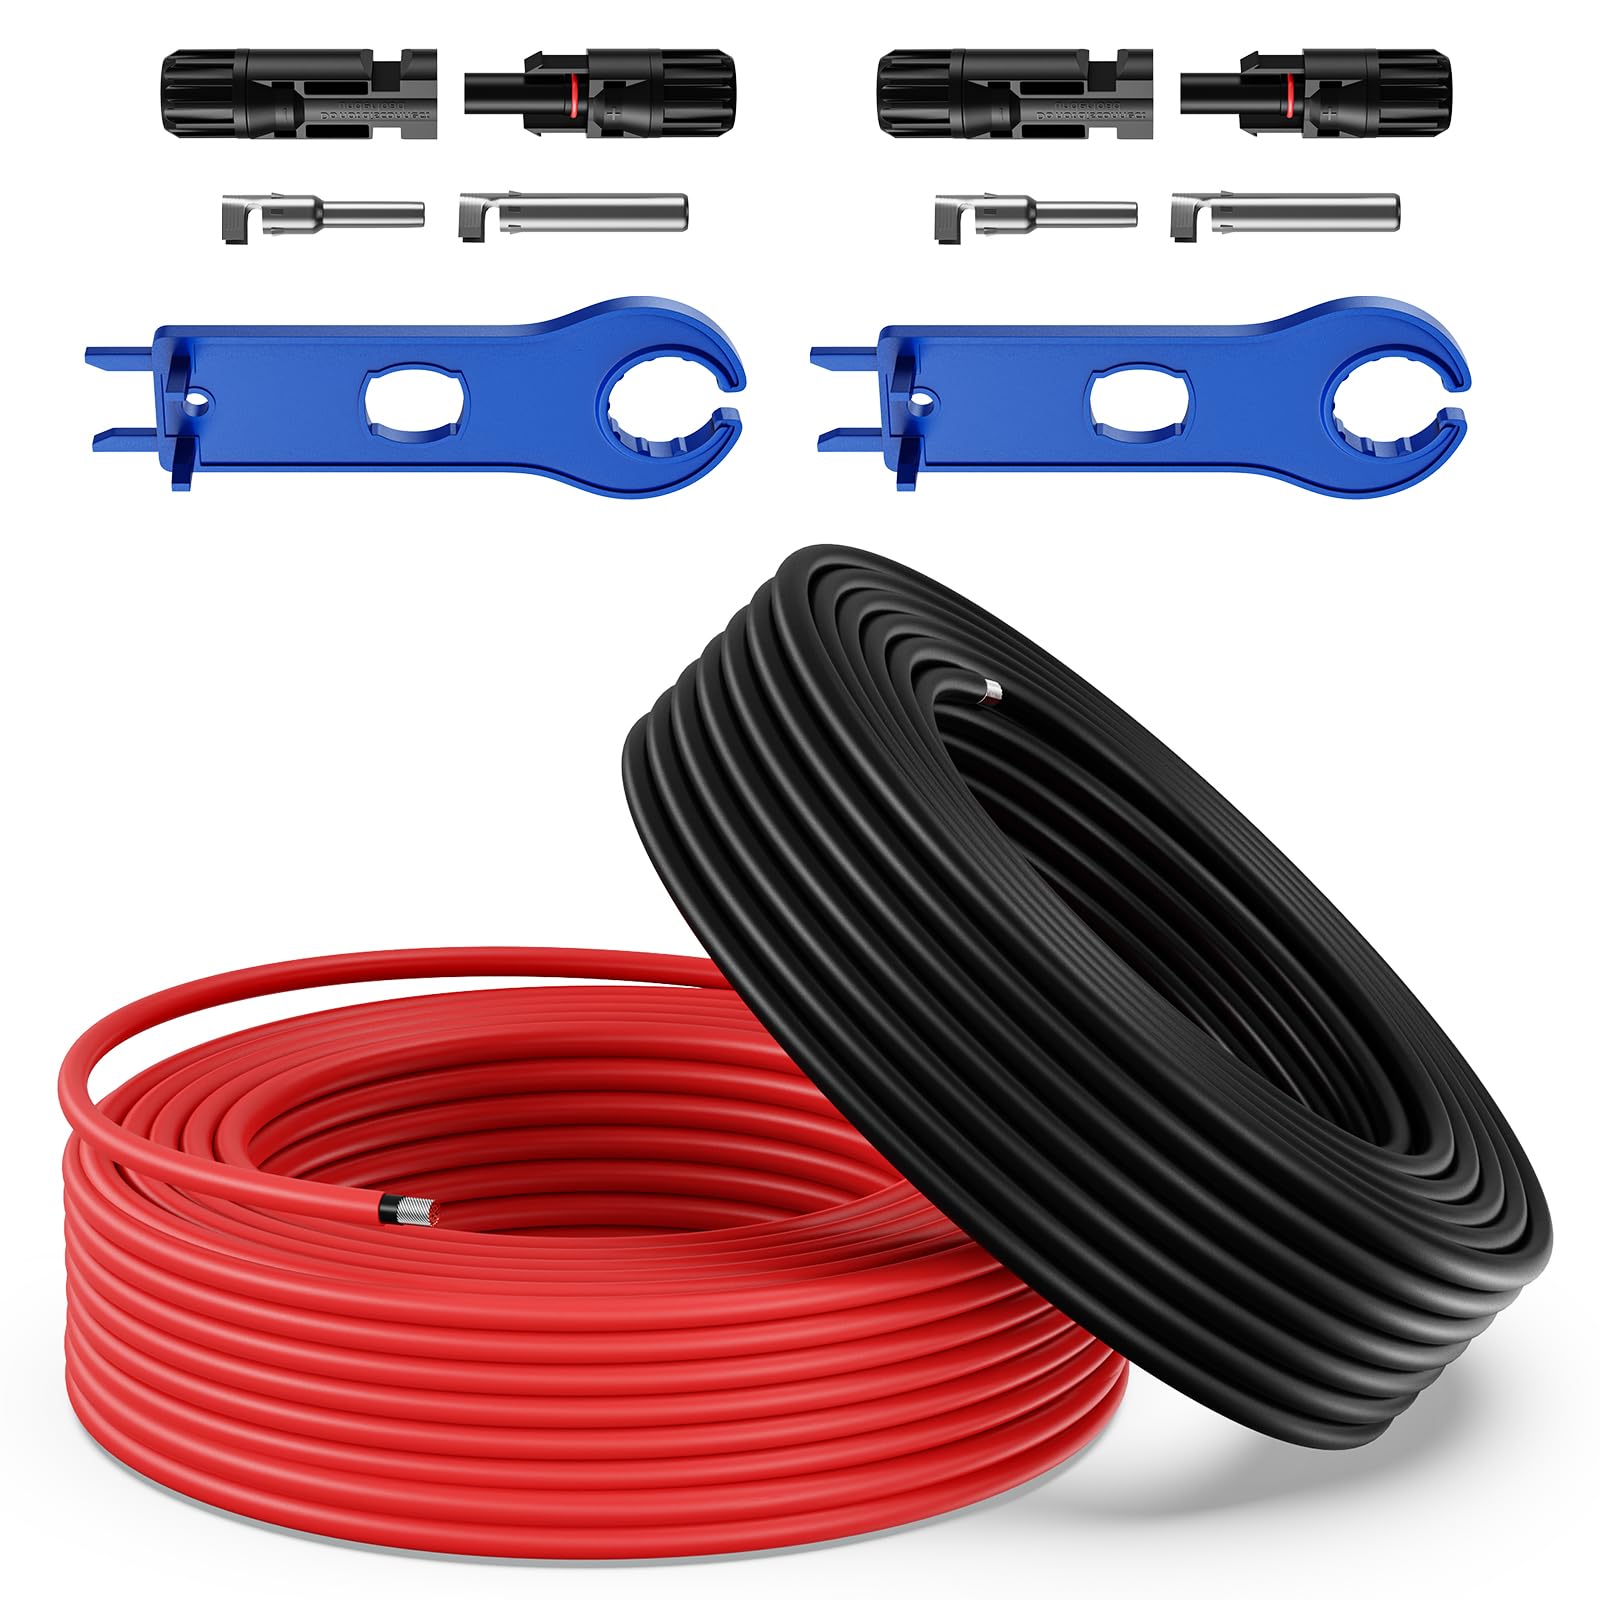 Bateria Power 20FT 10AWG(6mm²) Solar Panel Extension Cable, with Female and Male Connectors and Extra Free Spanners, Solar Panel Adaptor Kit Tool(20FT Red + 20FT Black)